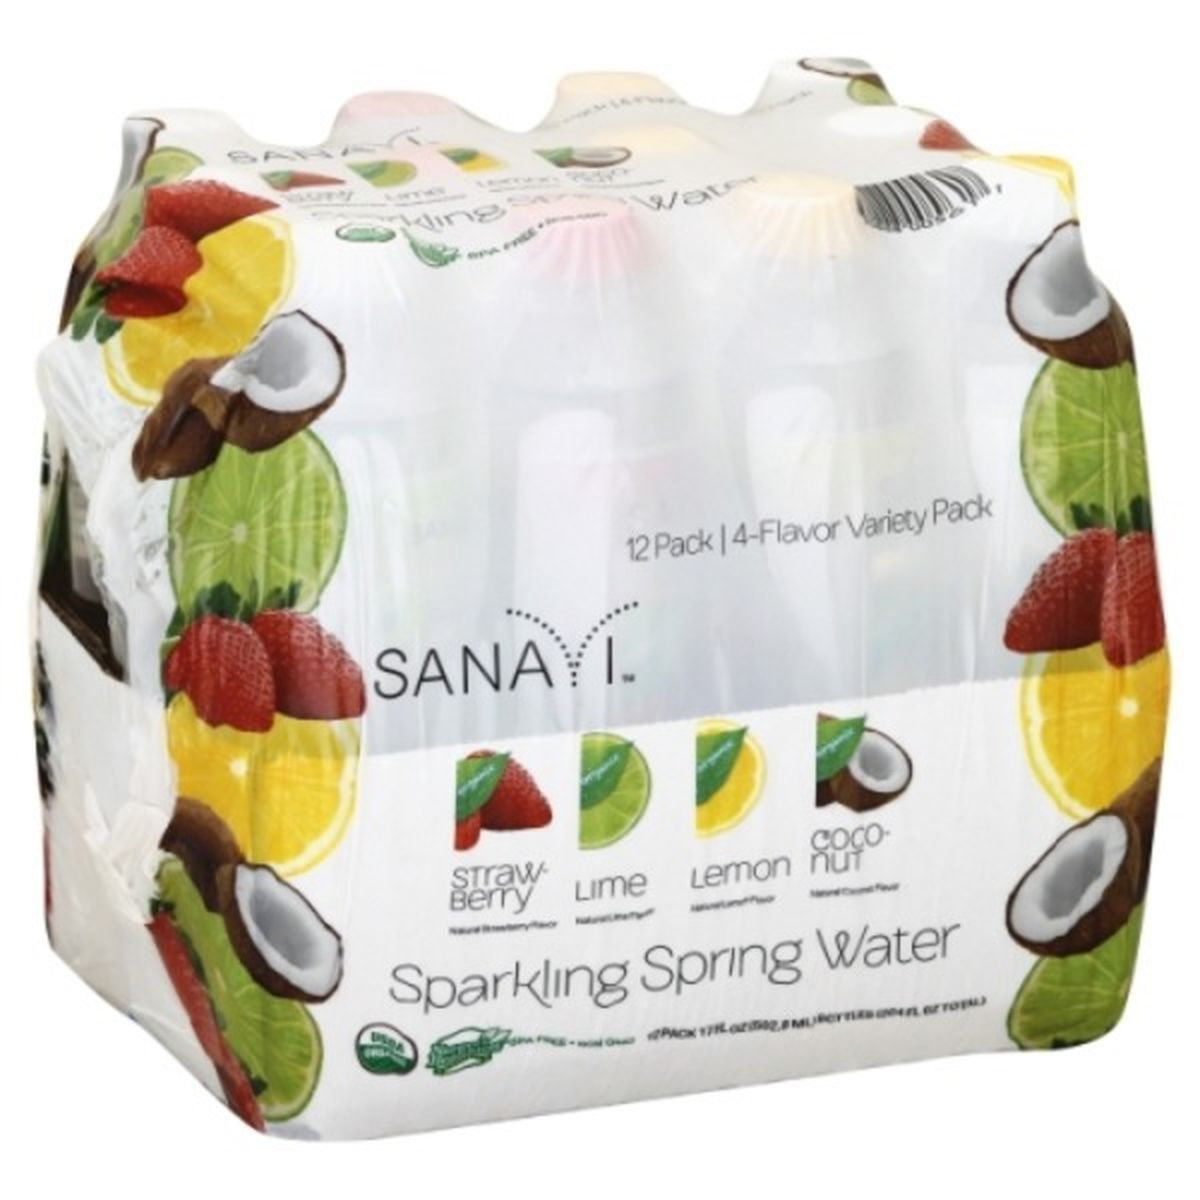 Calories in Sanavi Sparkling Water, Spring, 4-Flavor Variety Pack, 12 Pack